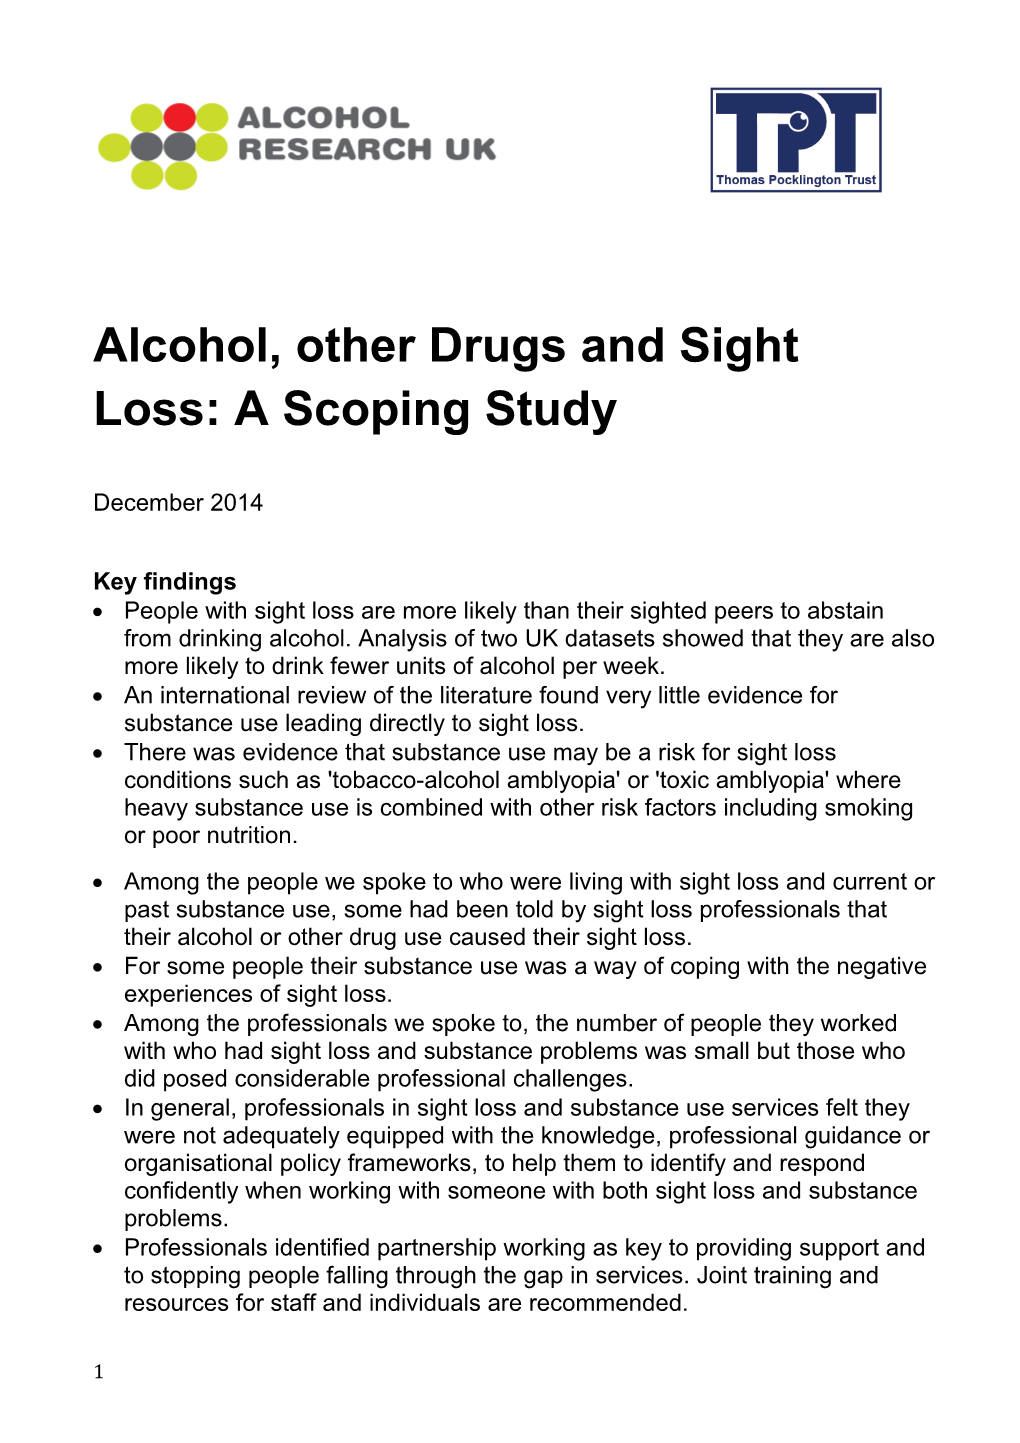 Alcohol, Other Drugs and Sight Loss: a Scoping Study